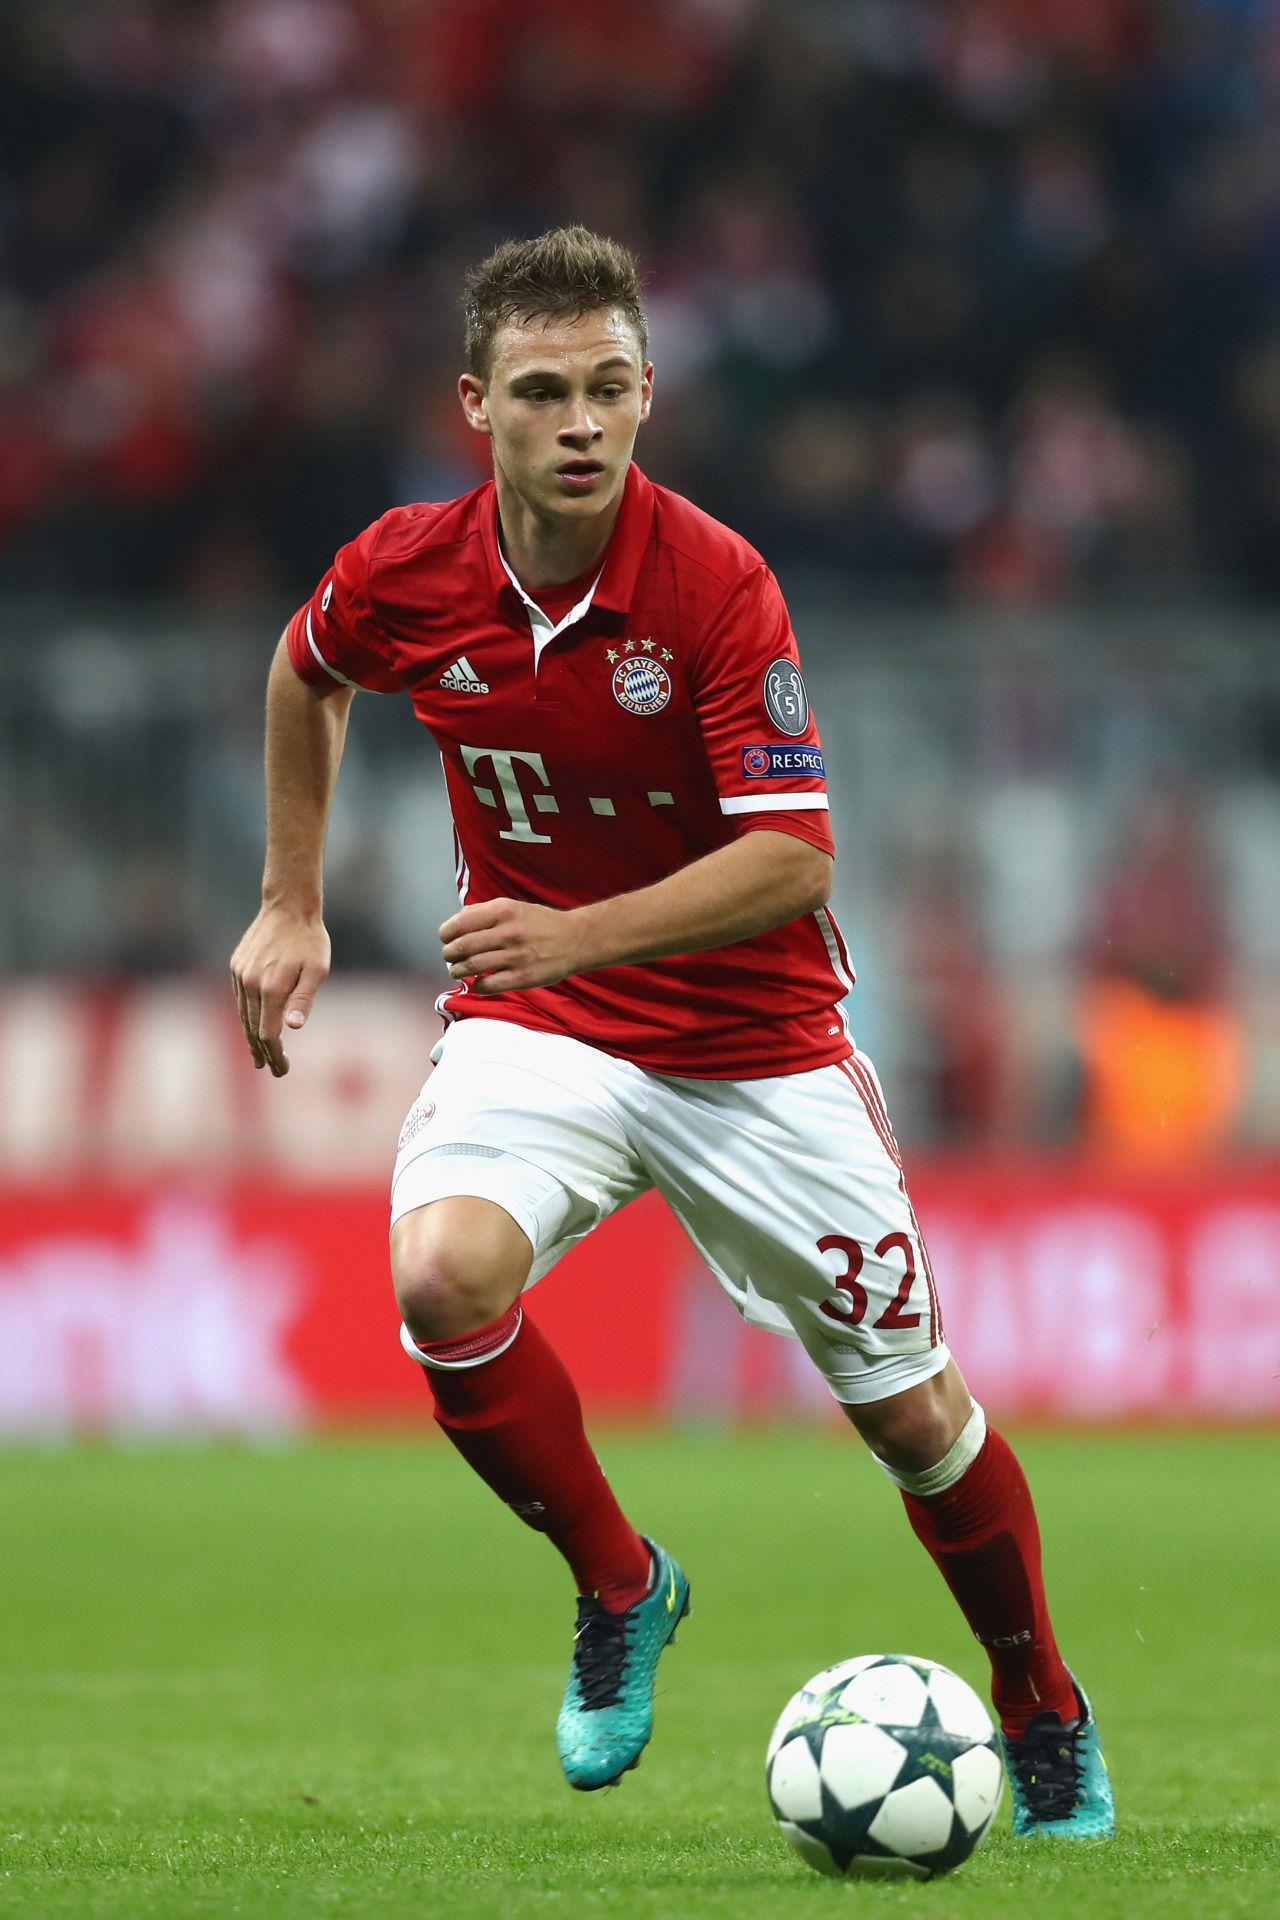 Joshua Kimmich Wallpaper for Android